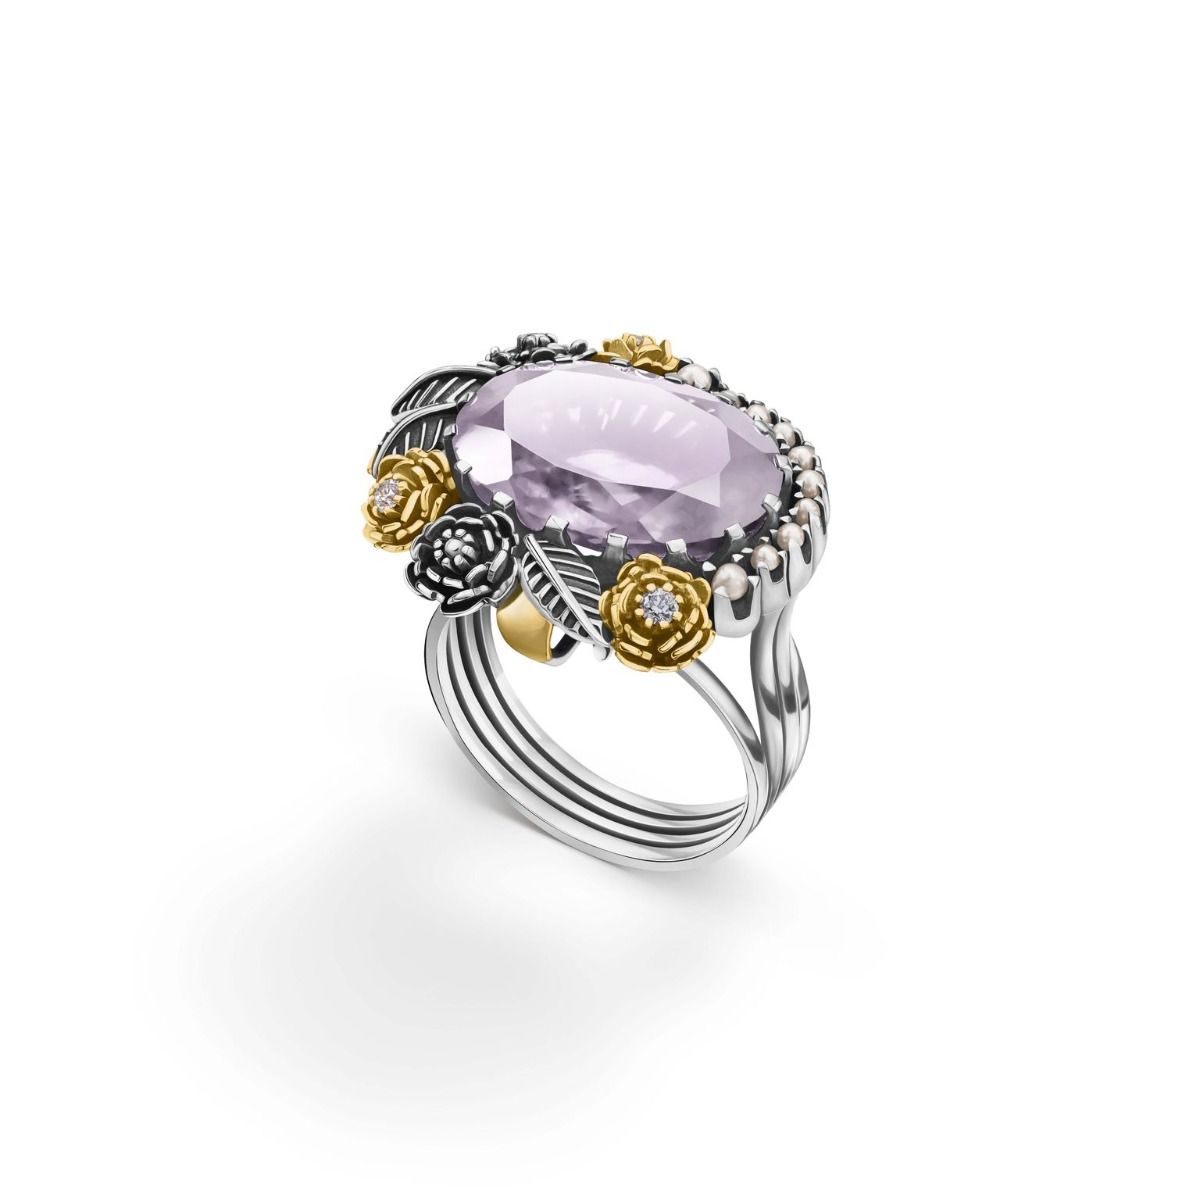 Floral Bloom Ring by Azza Fahmy - Designer Rings